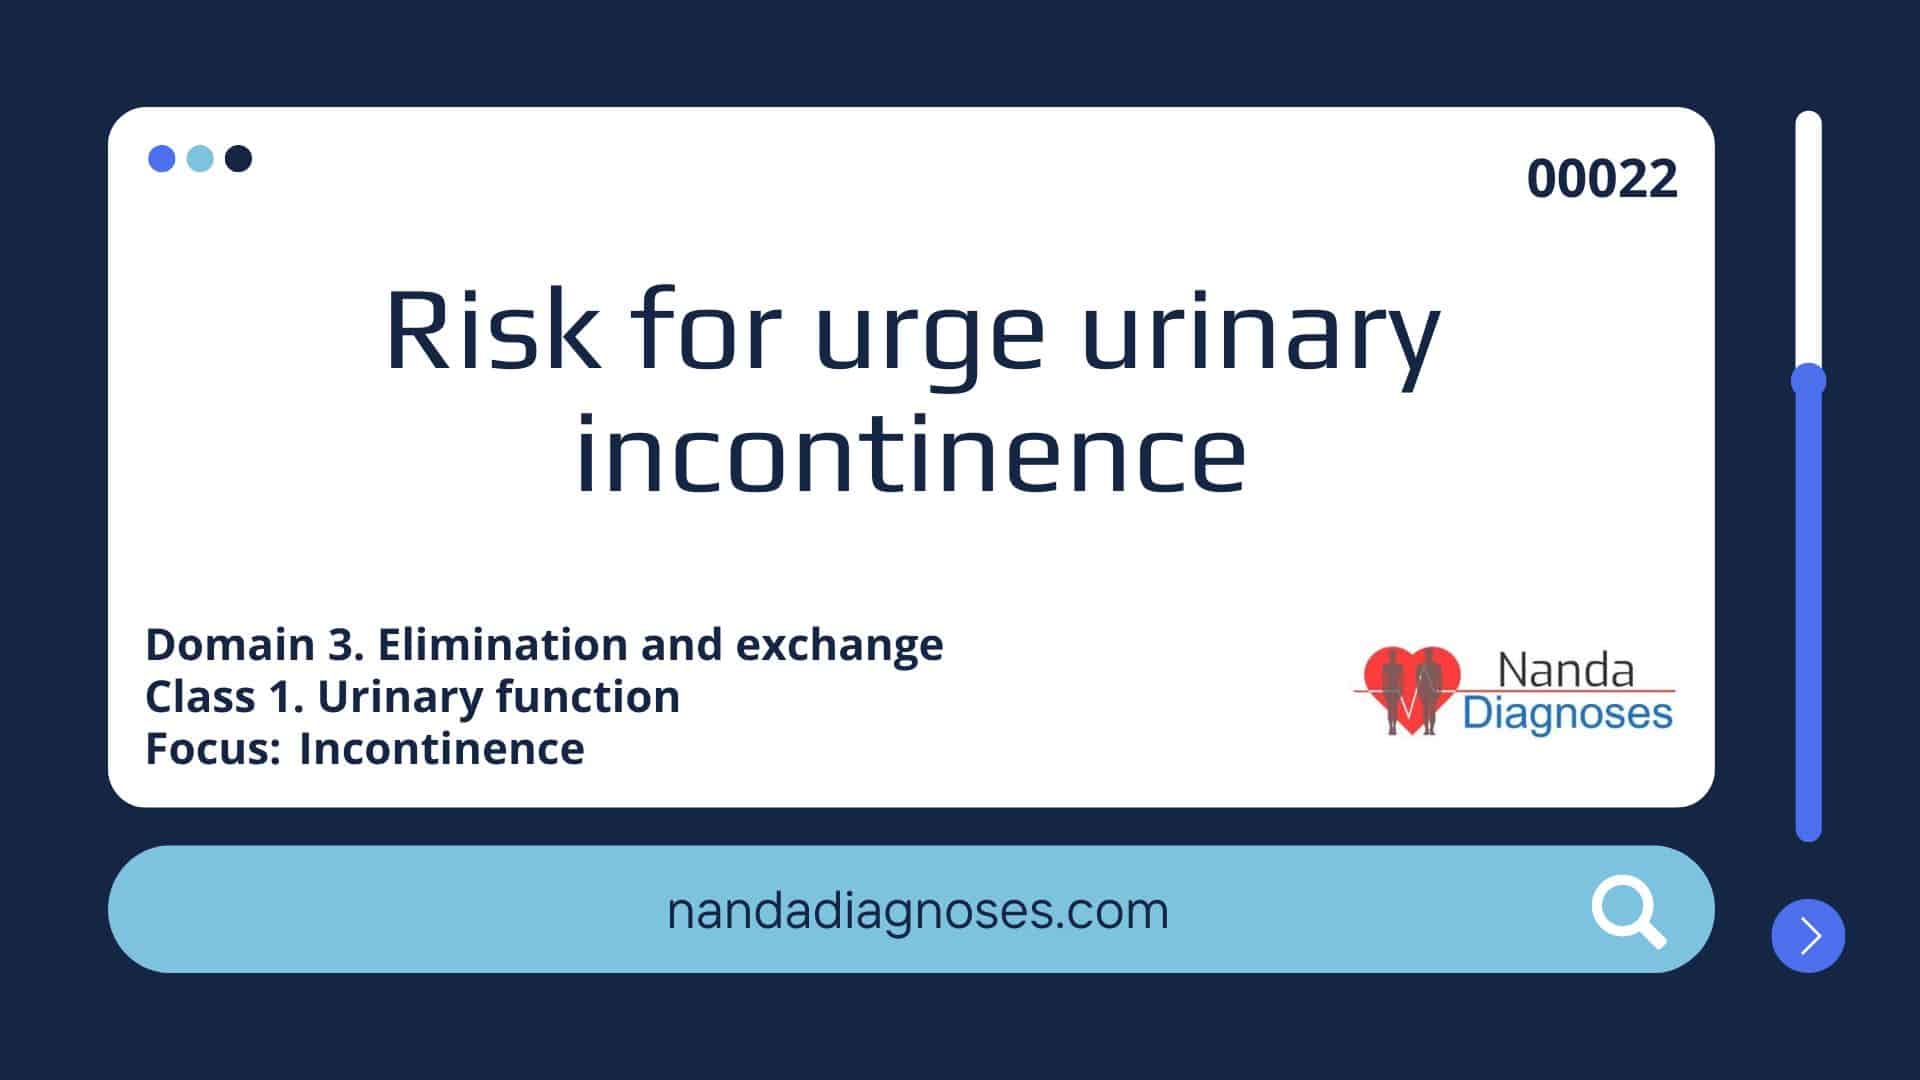 Risk for urge urinary incontinence